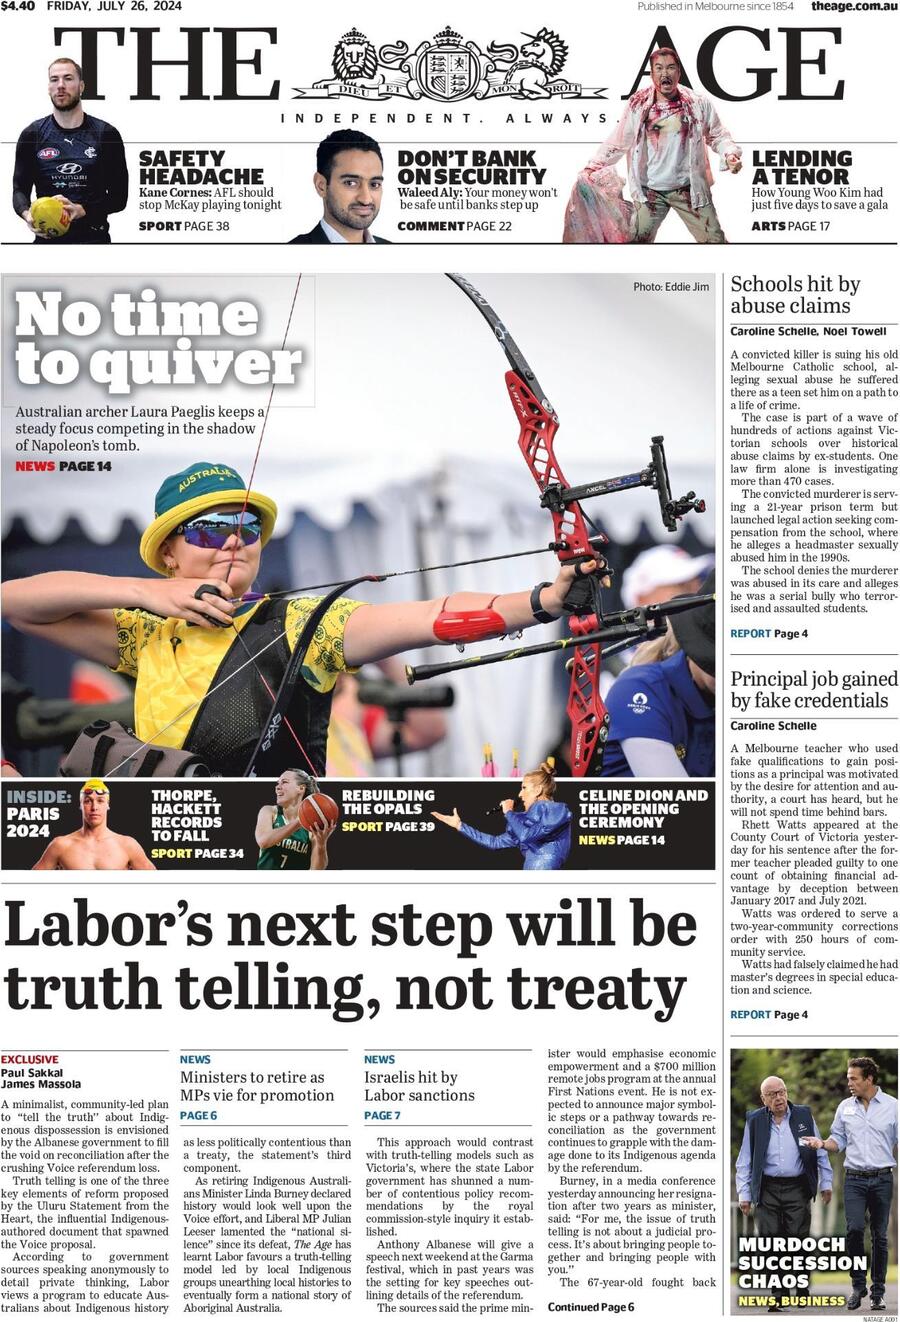 The Age - Front Page - 07/26/2024